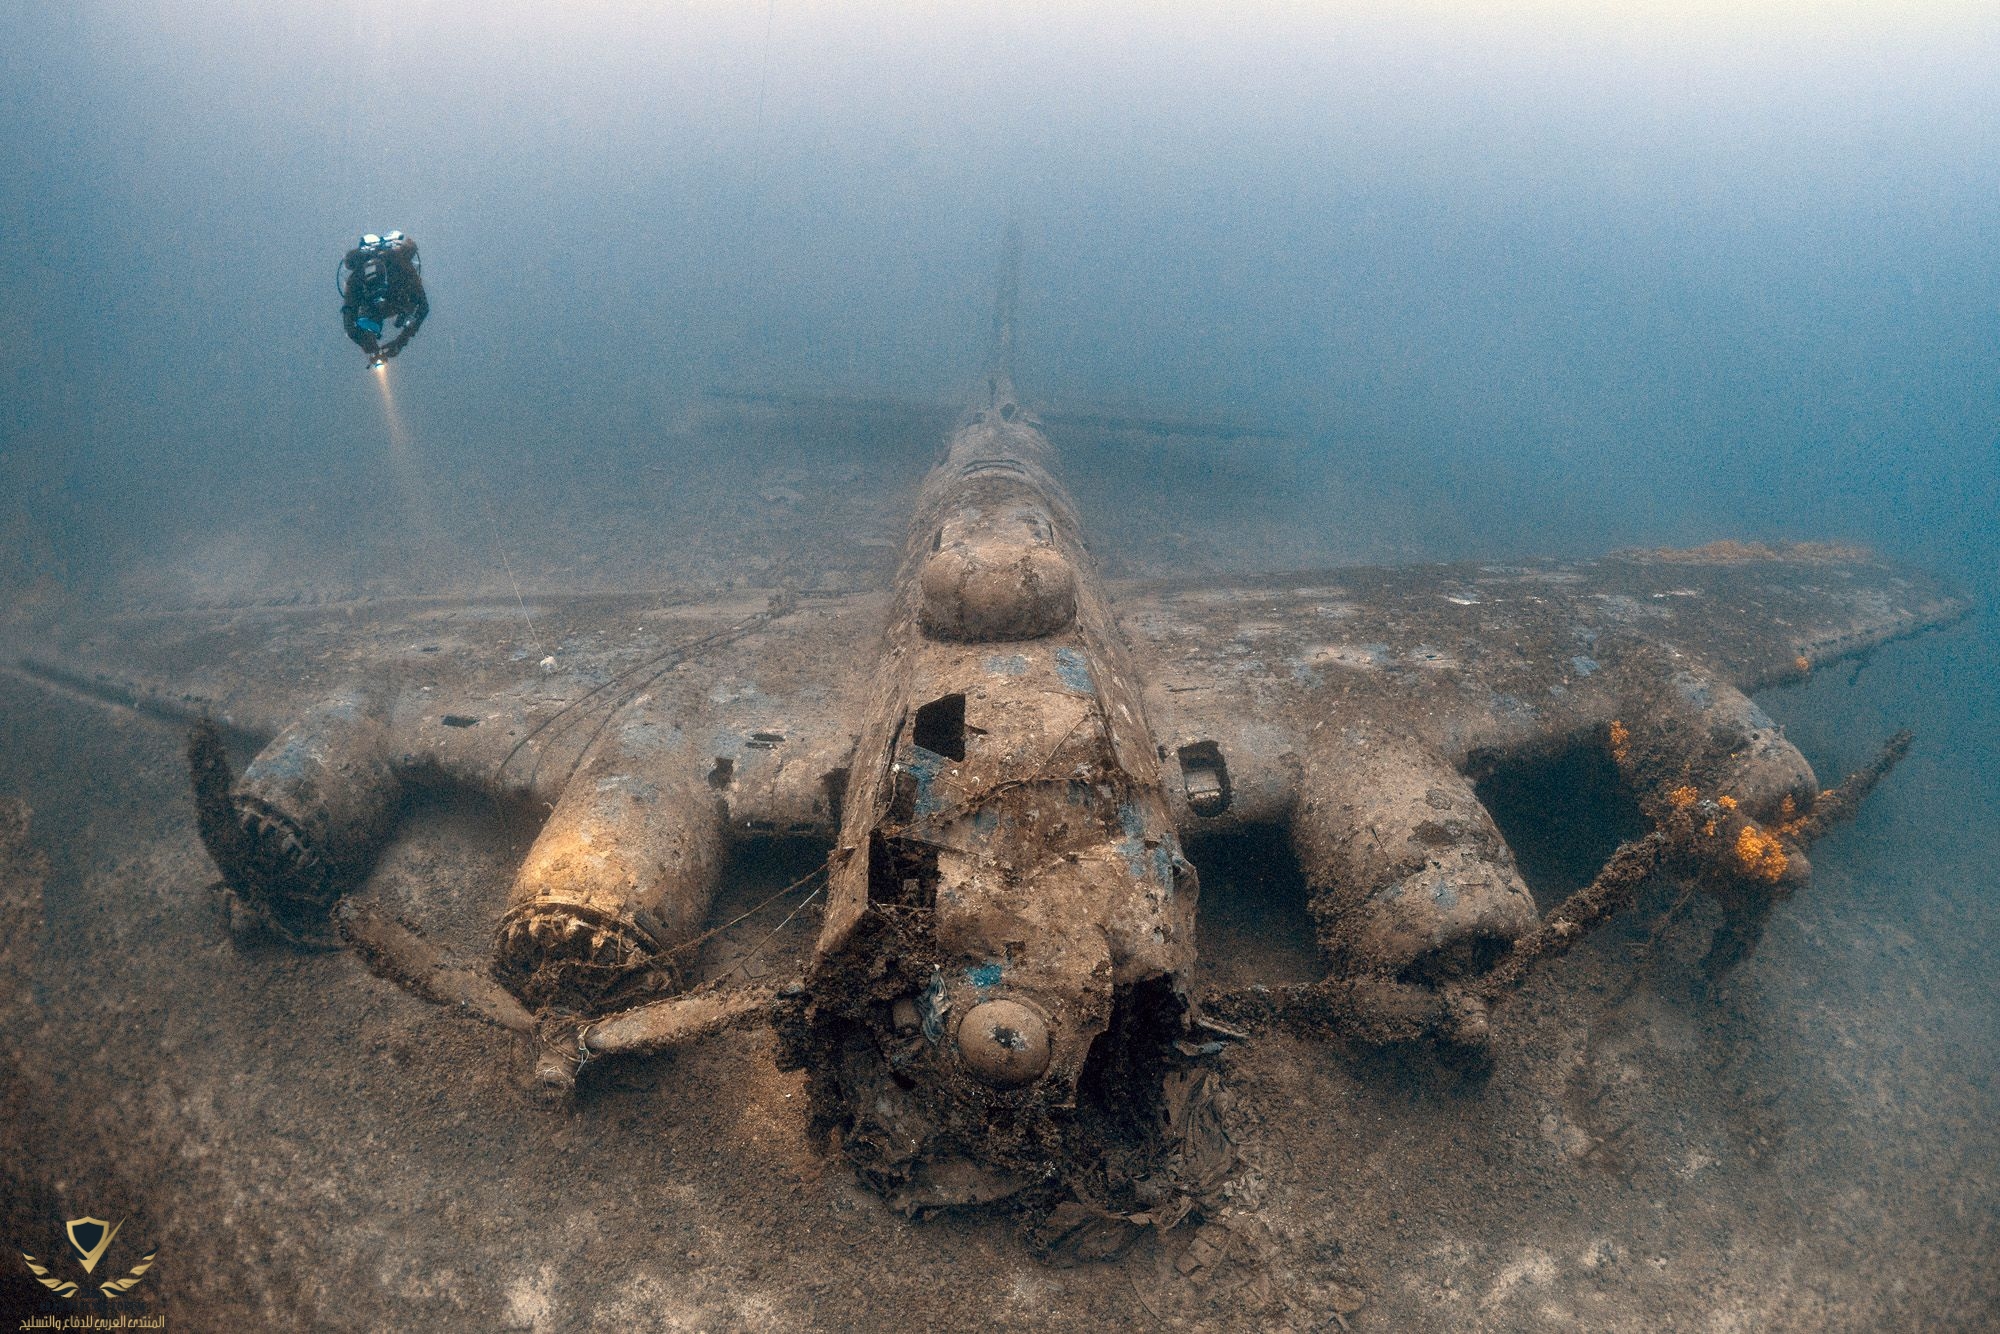 0_caters_ww2_plane_remains_01.jpg